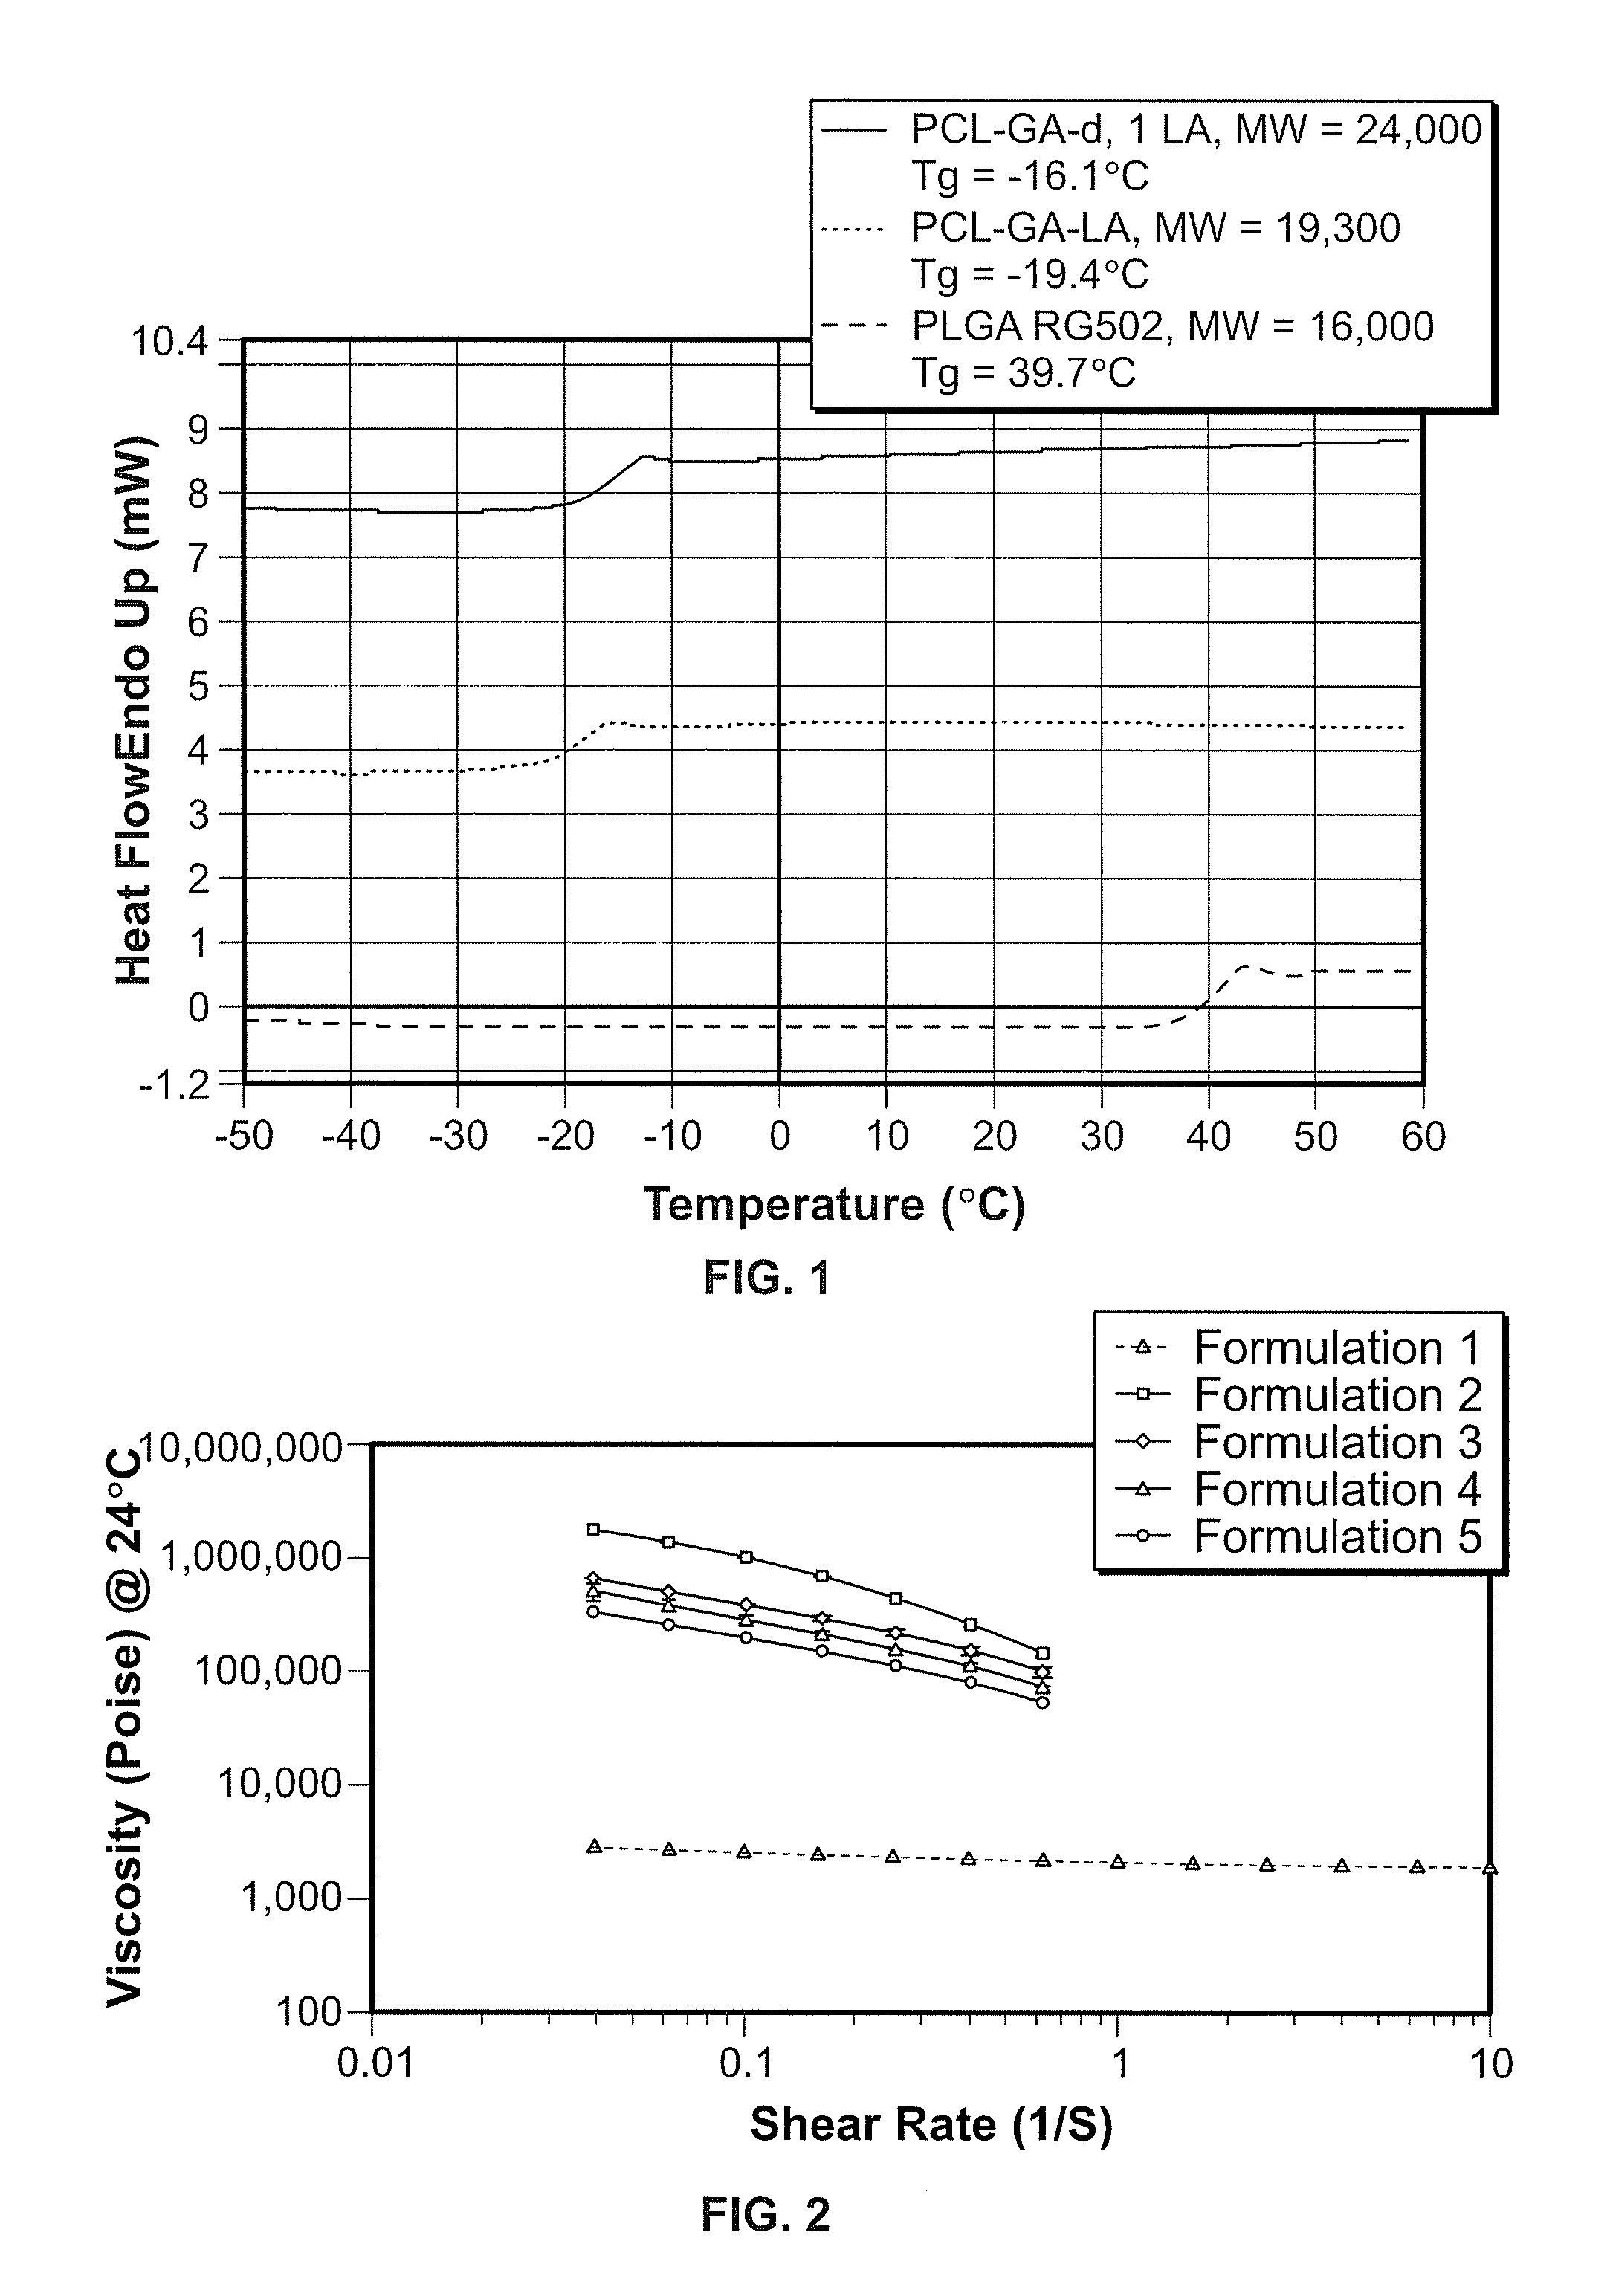 Implantable elastomeric caprolactone depot compositions and uses thereof